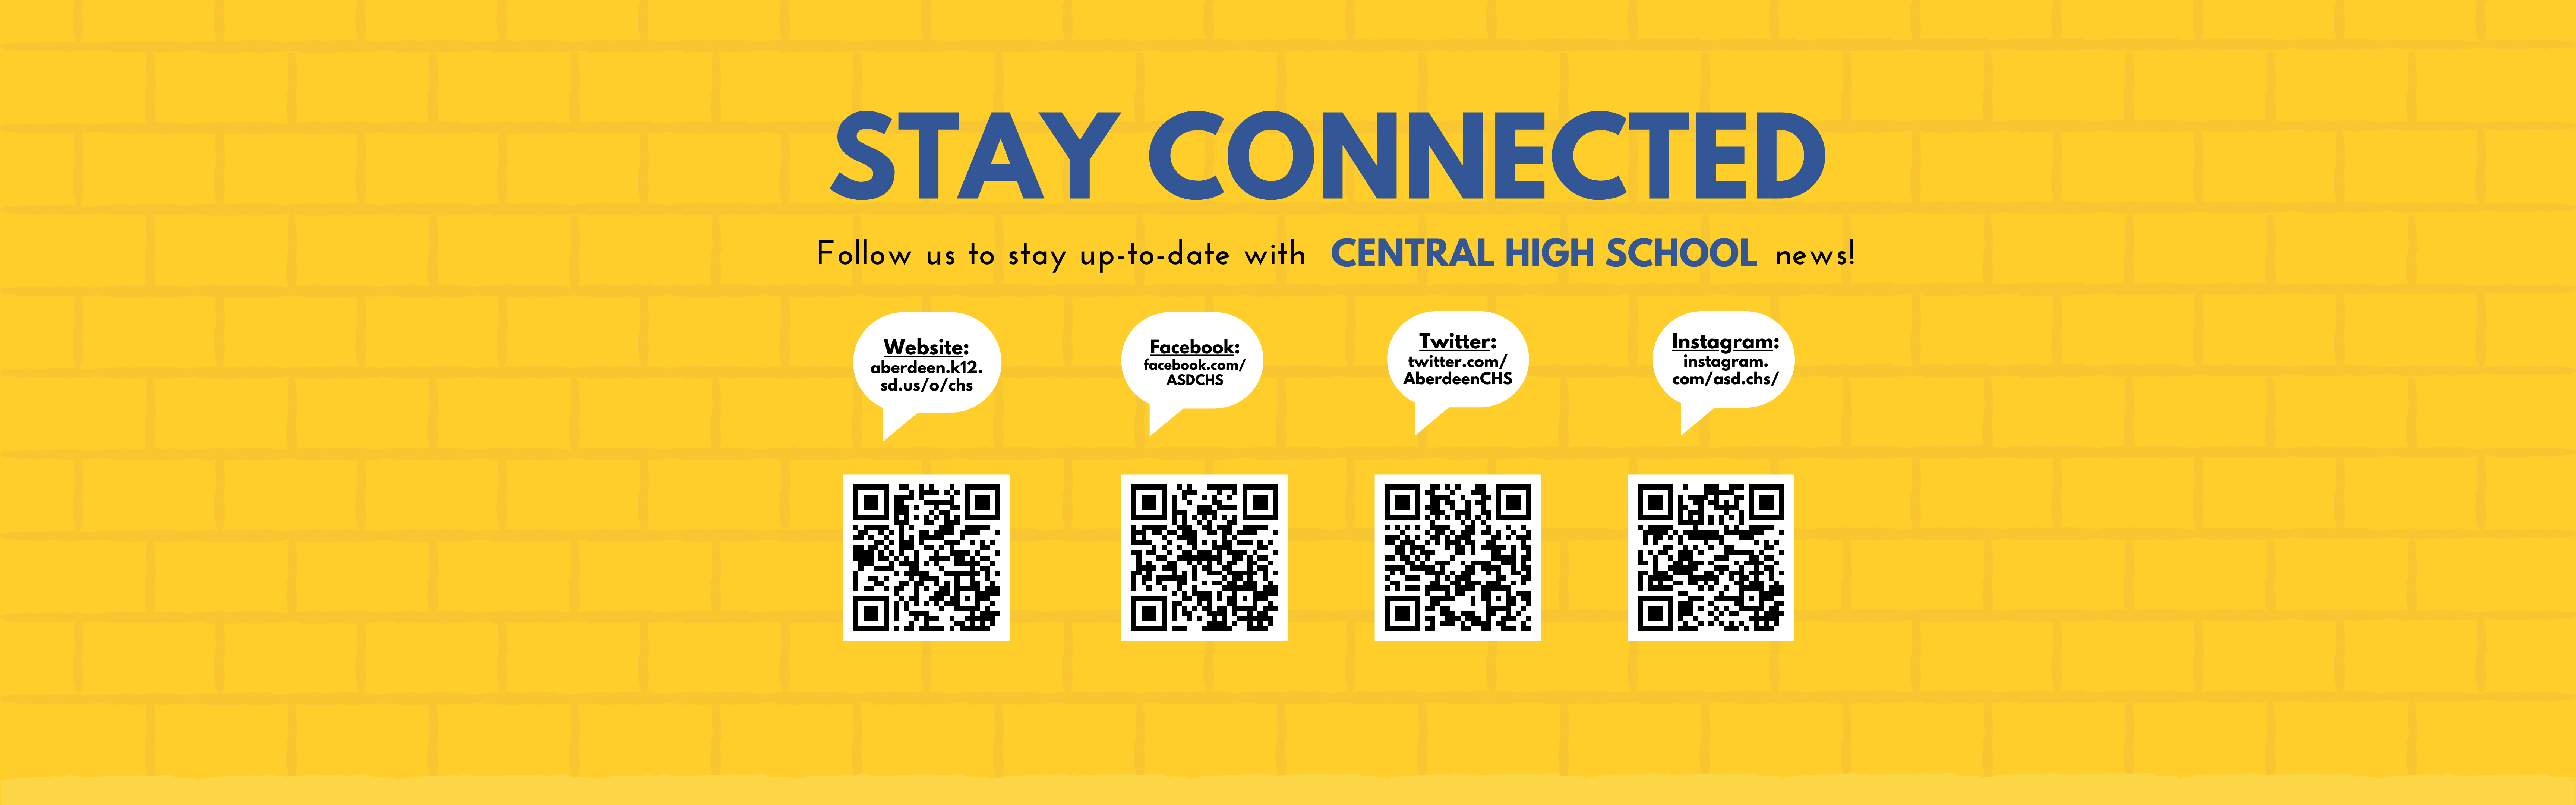 Stay Connected graphic with QR codes linking to CHS social media